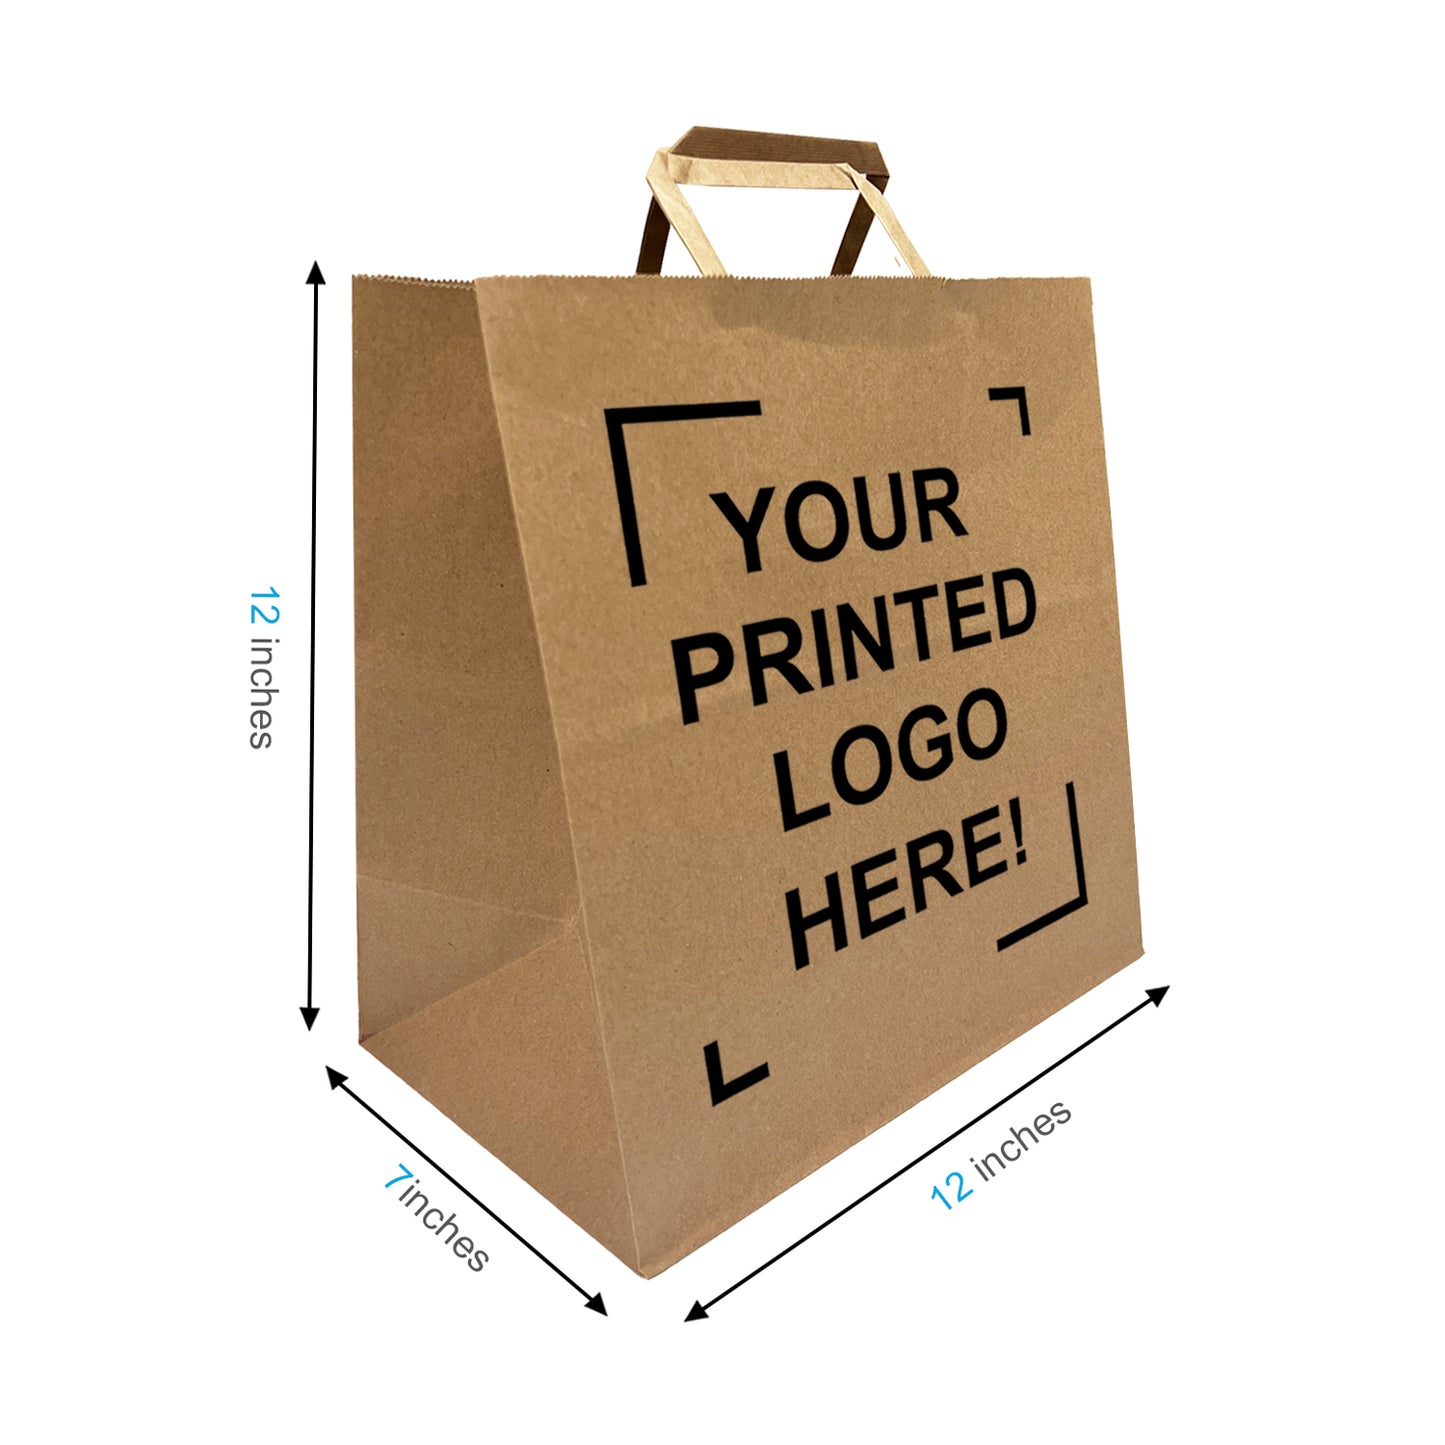 300 Pcs, Pluto, 12x7x12 inches, Kraft Paper Bags, with Flat Handle, Full Color Custom Print